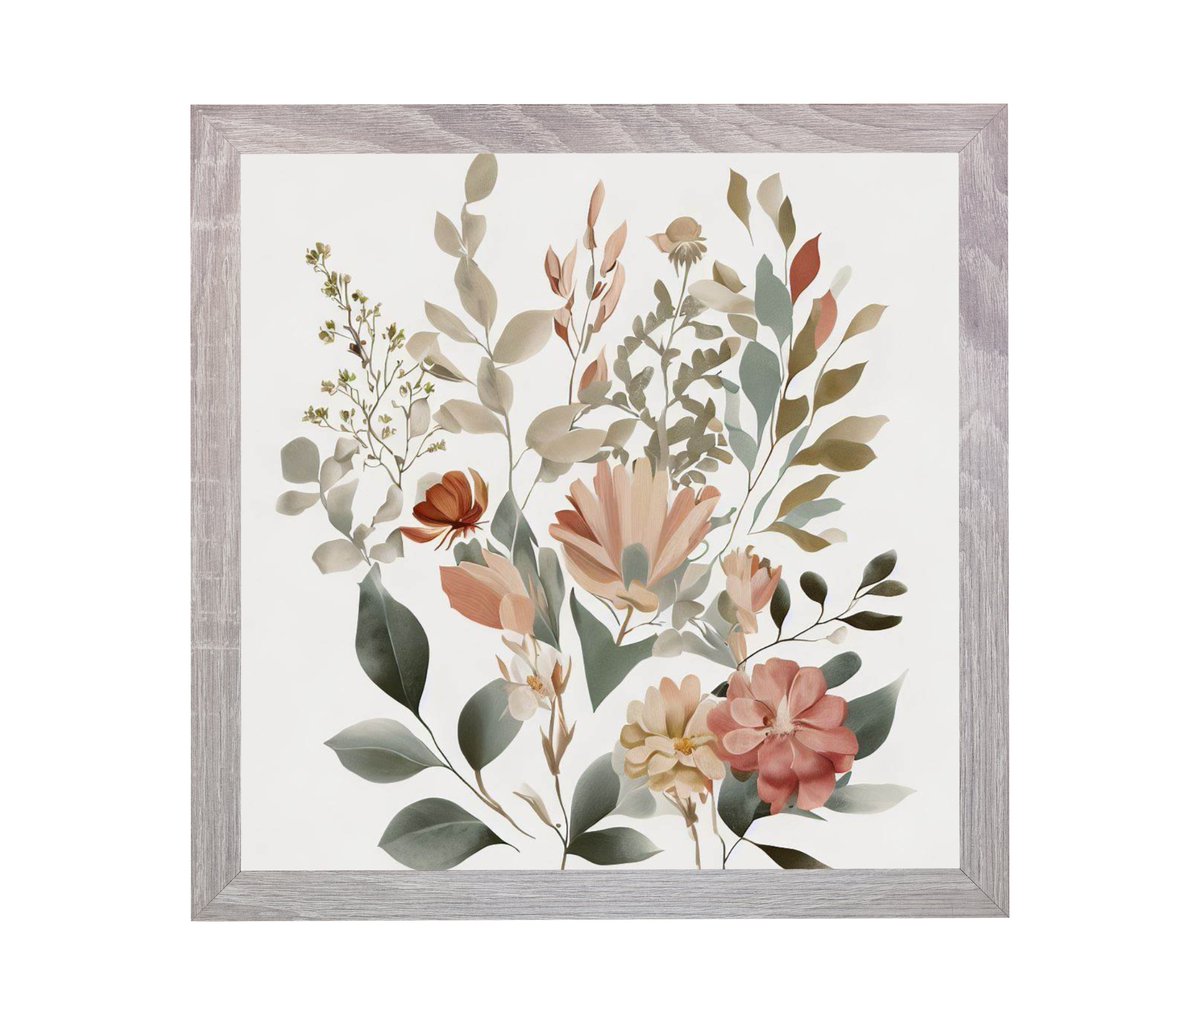 rb.gy/r73iuo
Elevate your space with our square digital print of watercolor botanical flowers. #BotanicalArt #WatercolorPrint #NatureInspired #FloralDecor #ArtisticFlowers #AffordableArt #FarmhouseDecor #FloralArtPrint